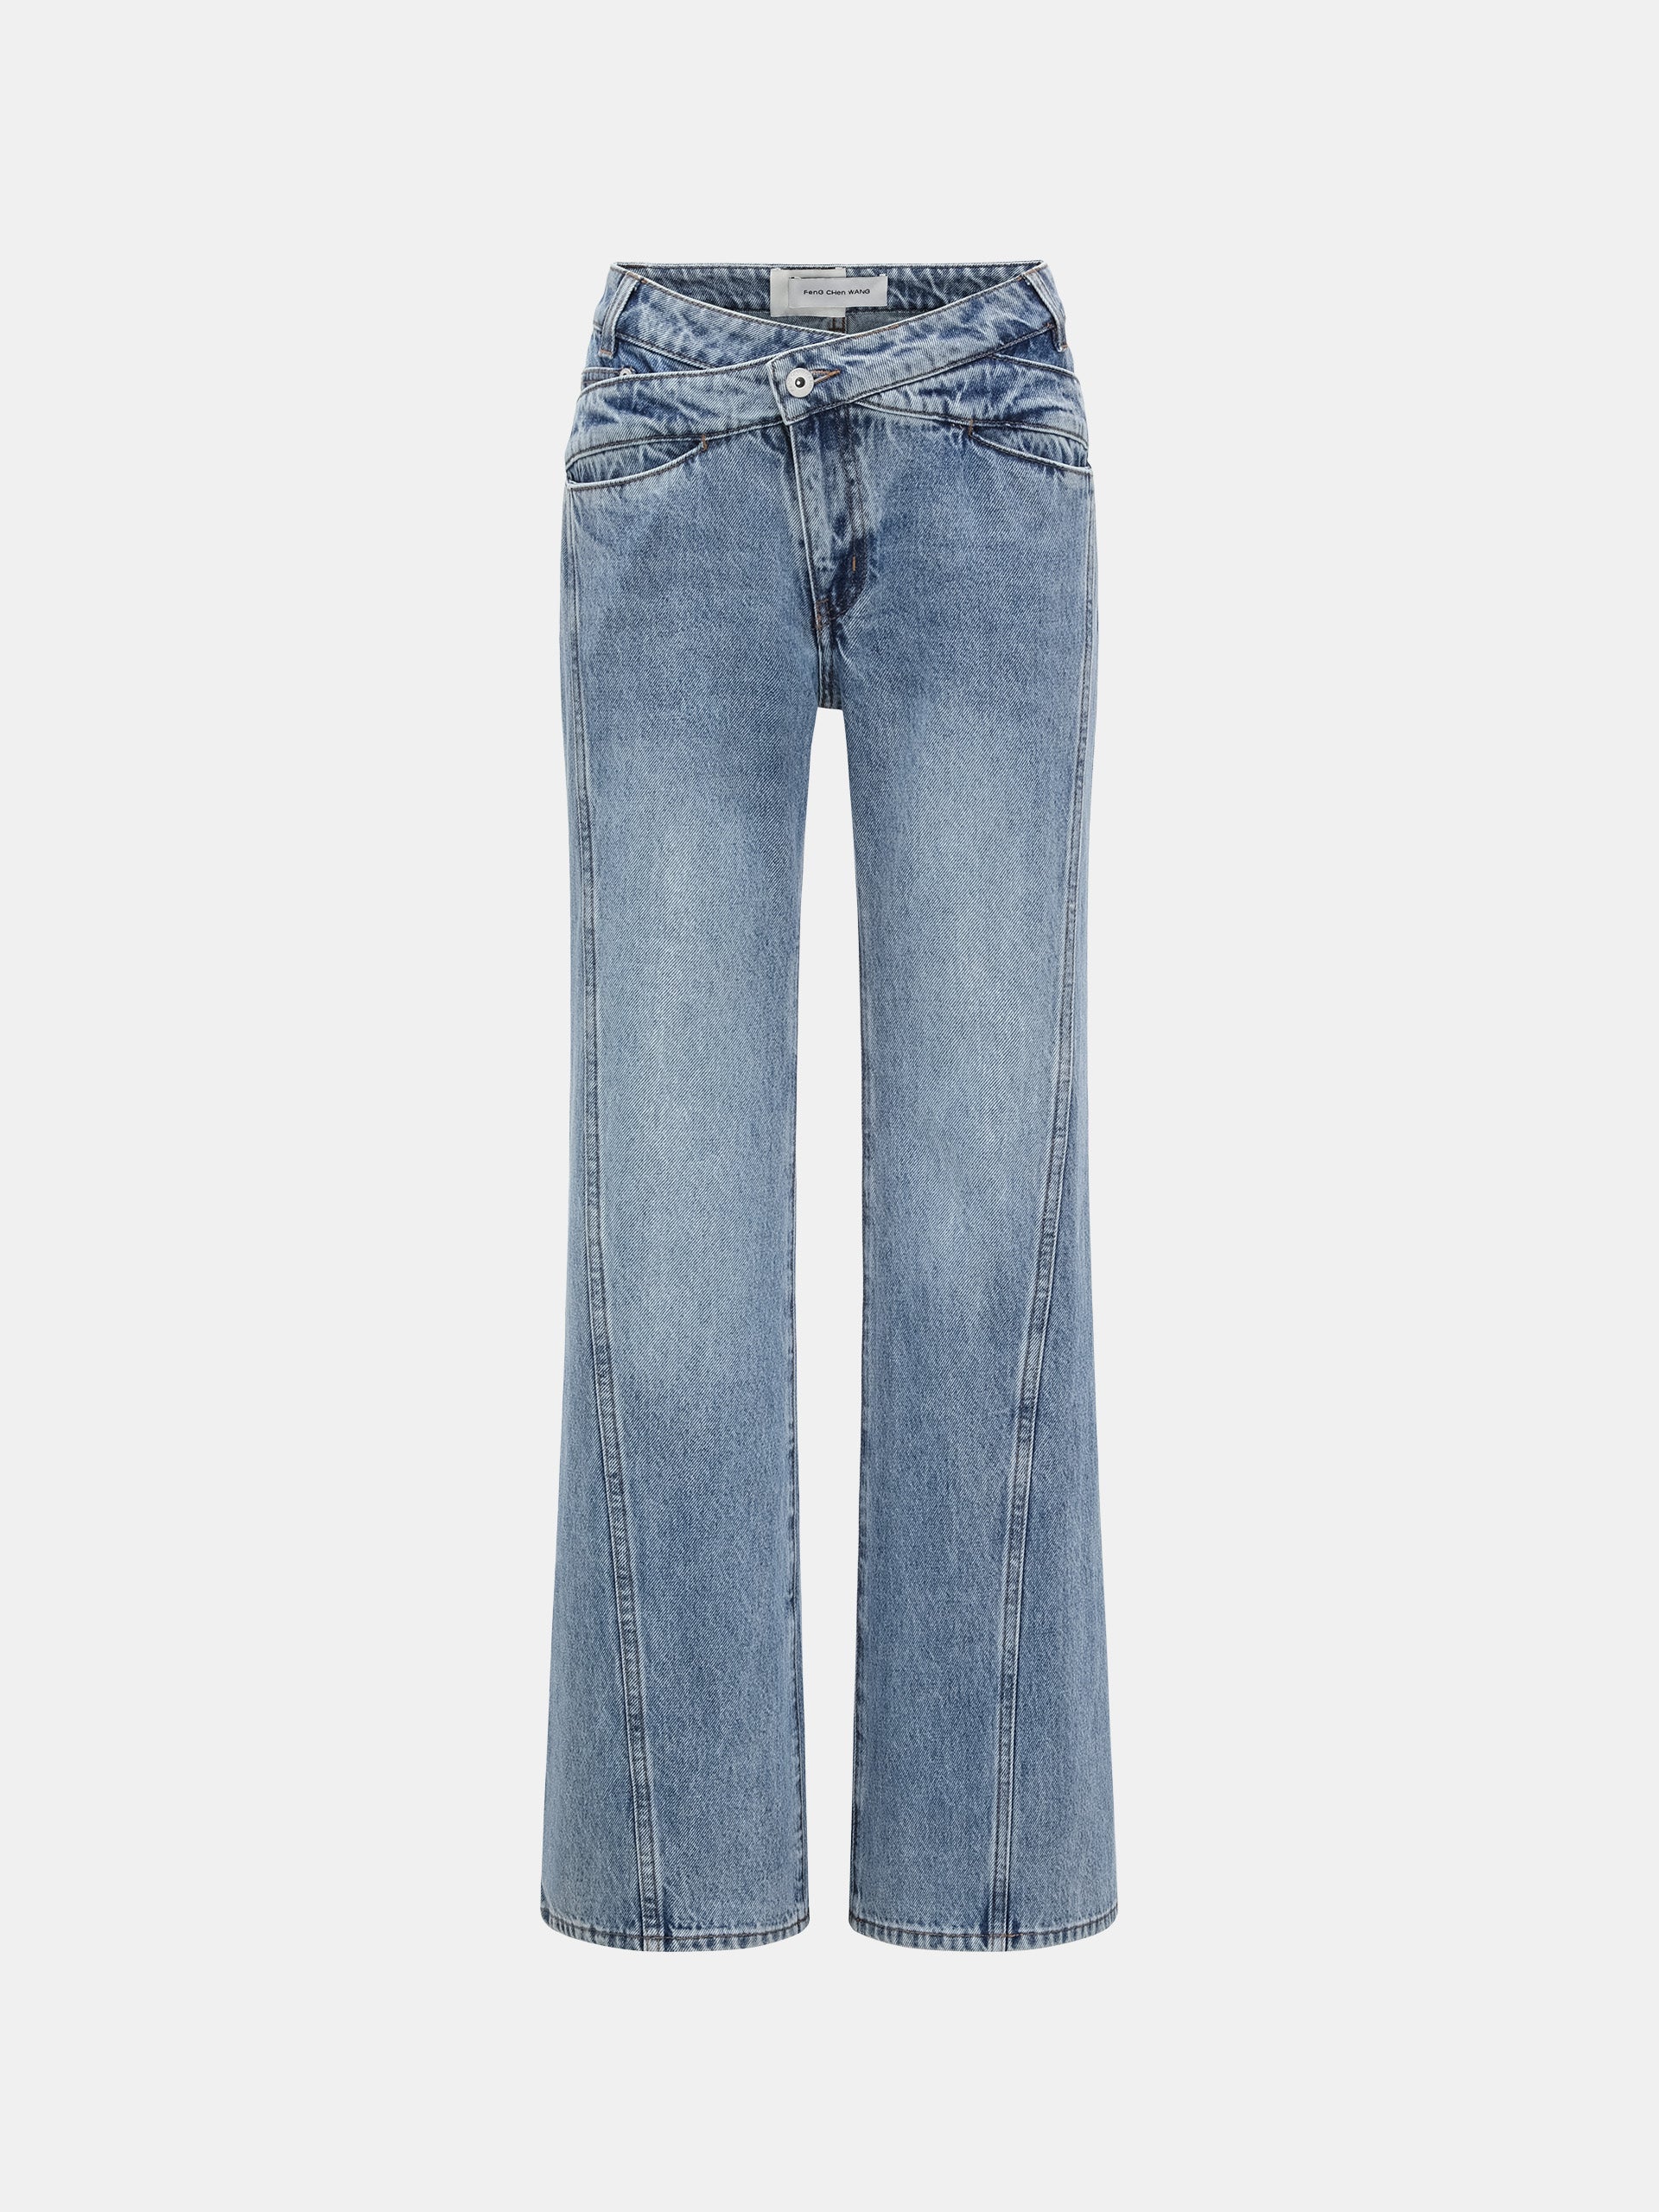 Feng Chen Wang Off-White Five-Pocket Jeans